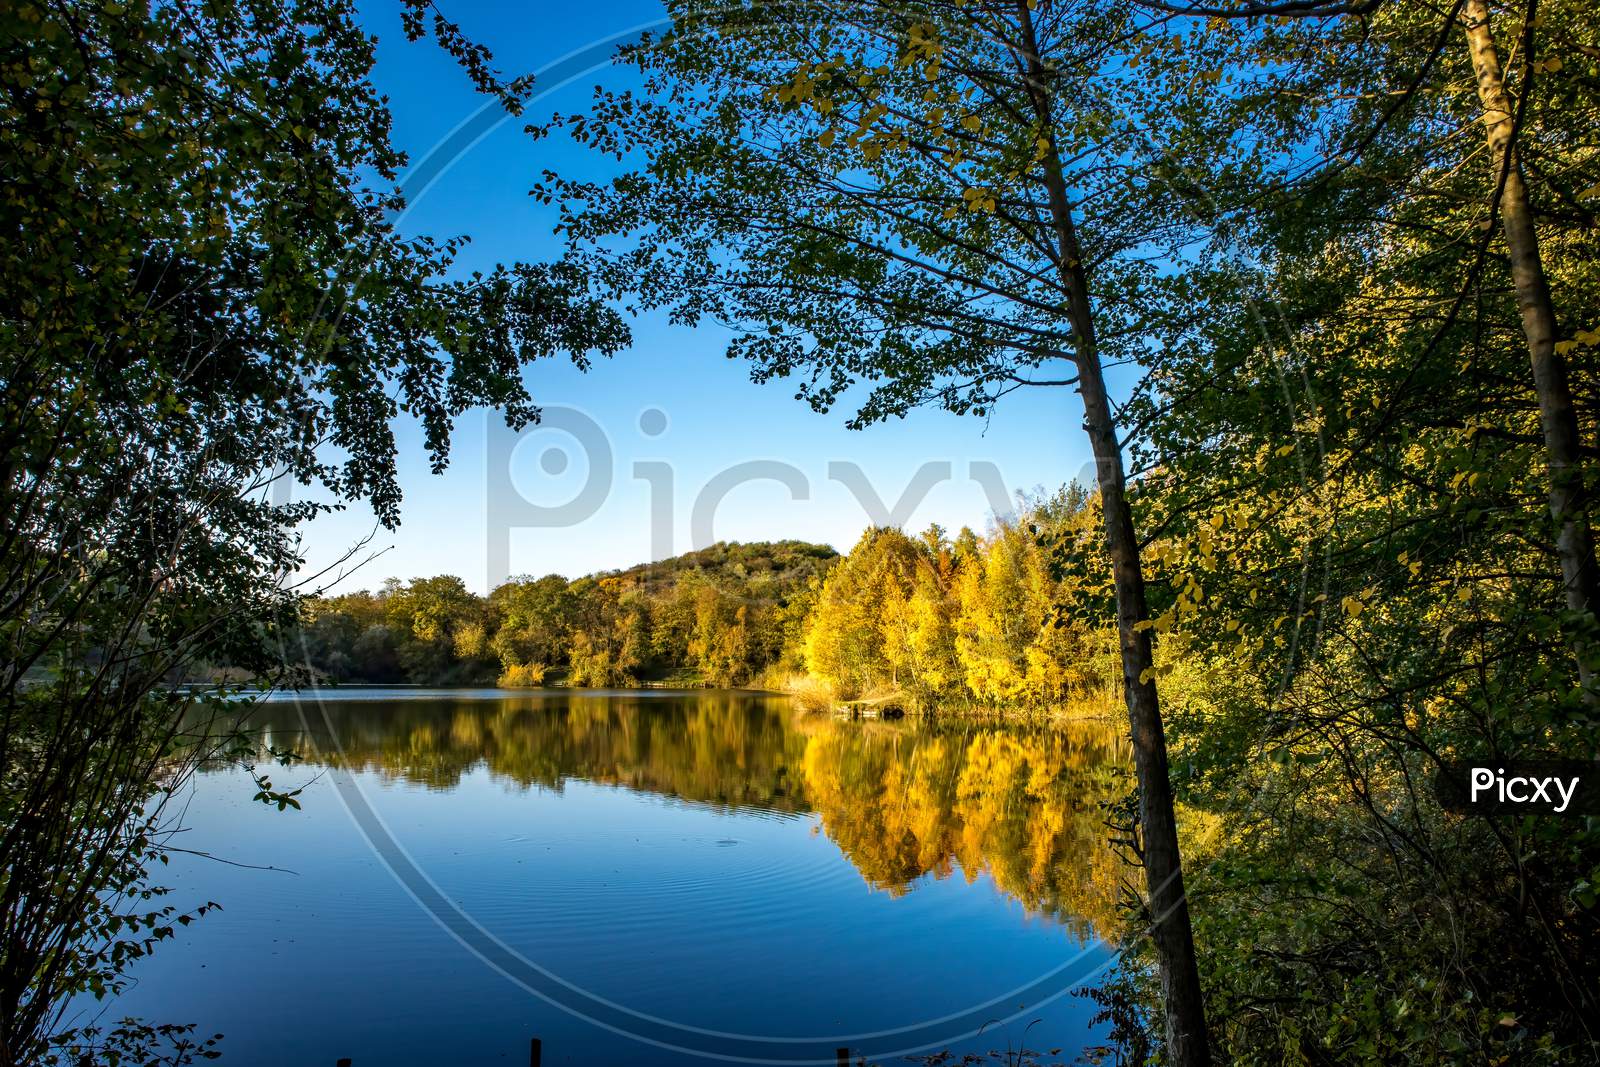 A beautiful little lake called Oberwaldsee in Germany at a sunny day in Autumn with a colorful forest reflecting in the water.